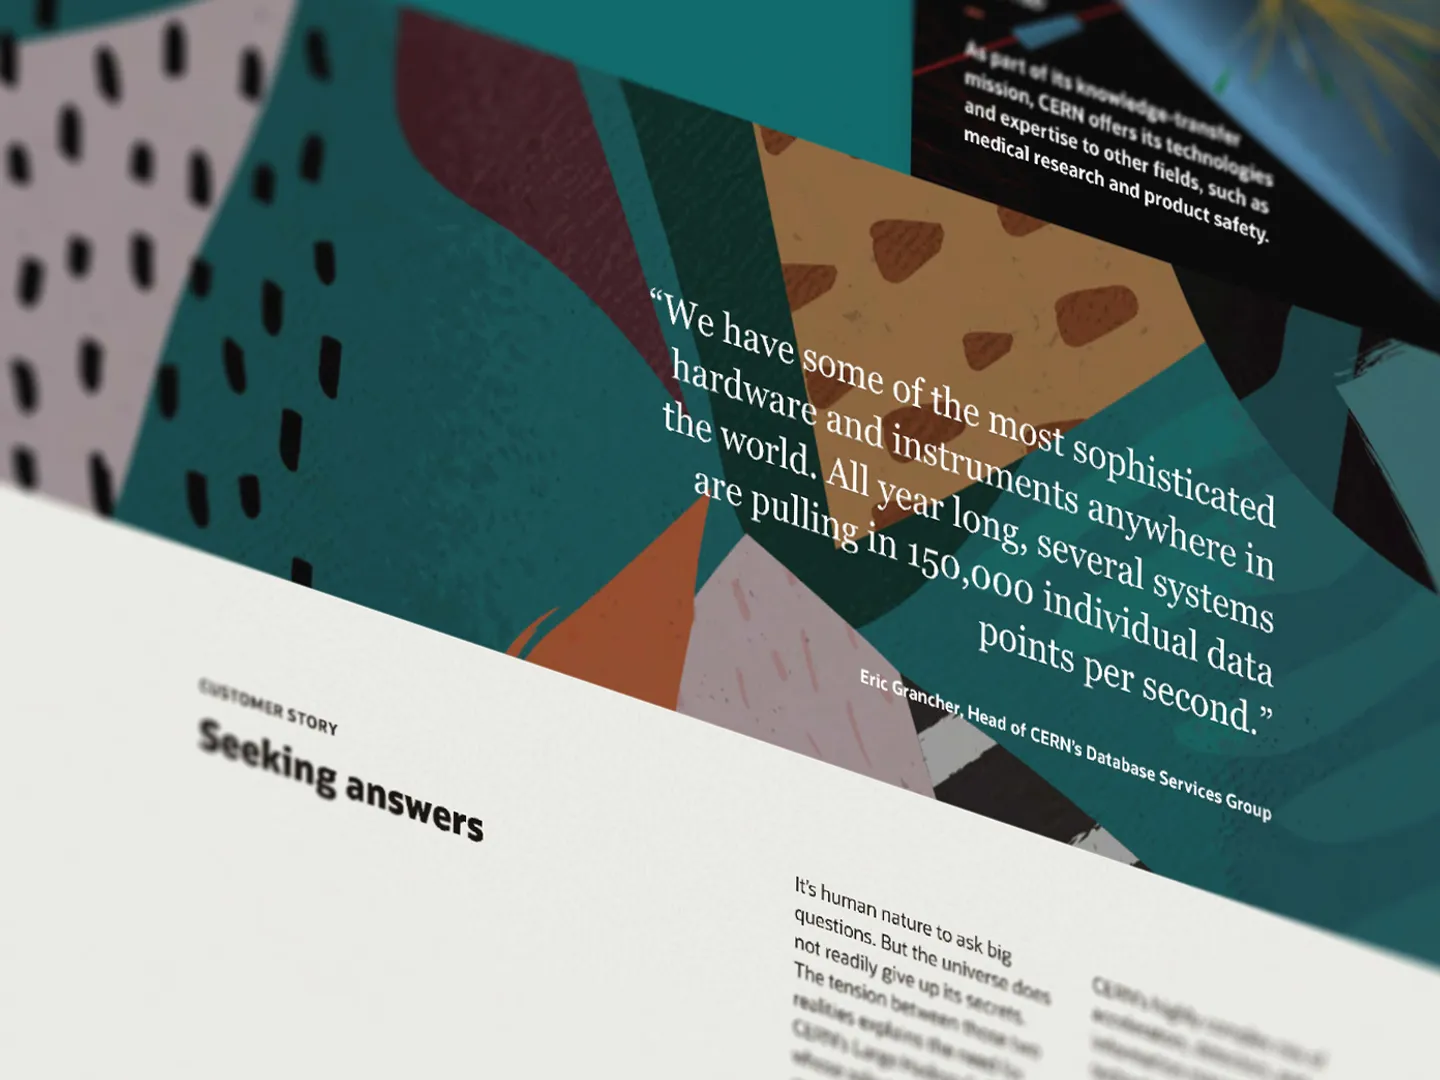 Image showing branded illustrations of patterns and colors on a web page design